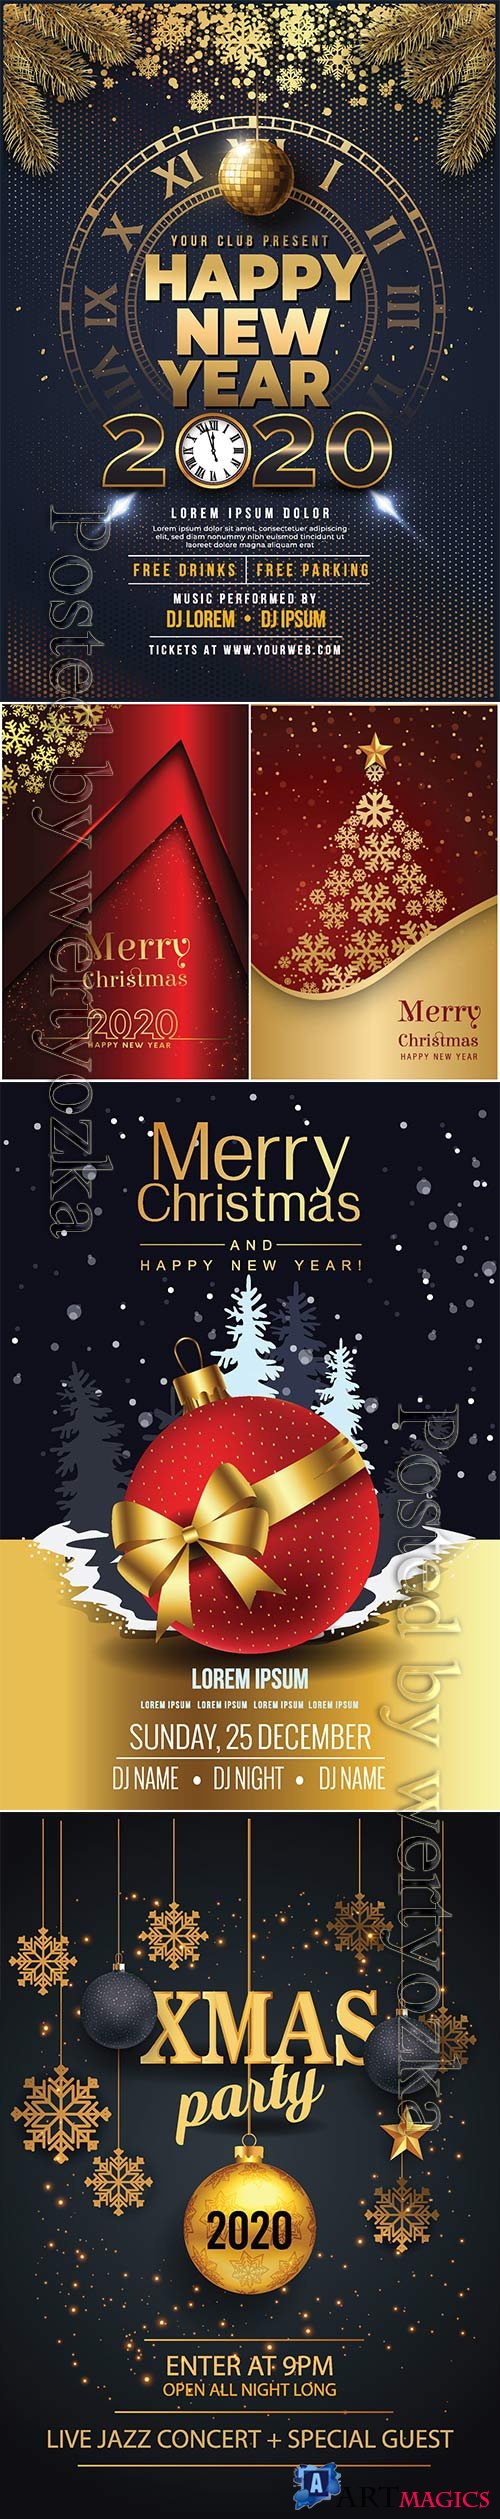 2020 Merry Chistmas and Happy New Year vector illustration # 2